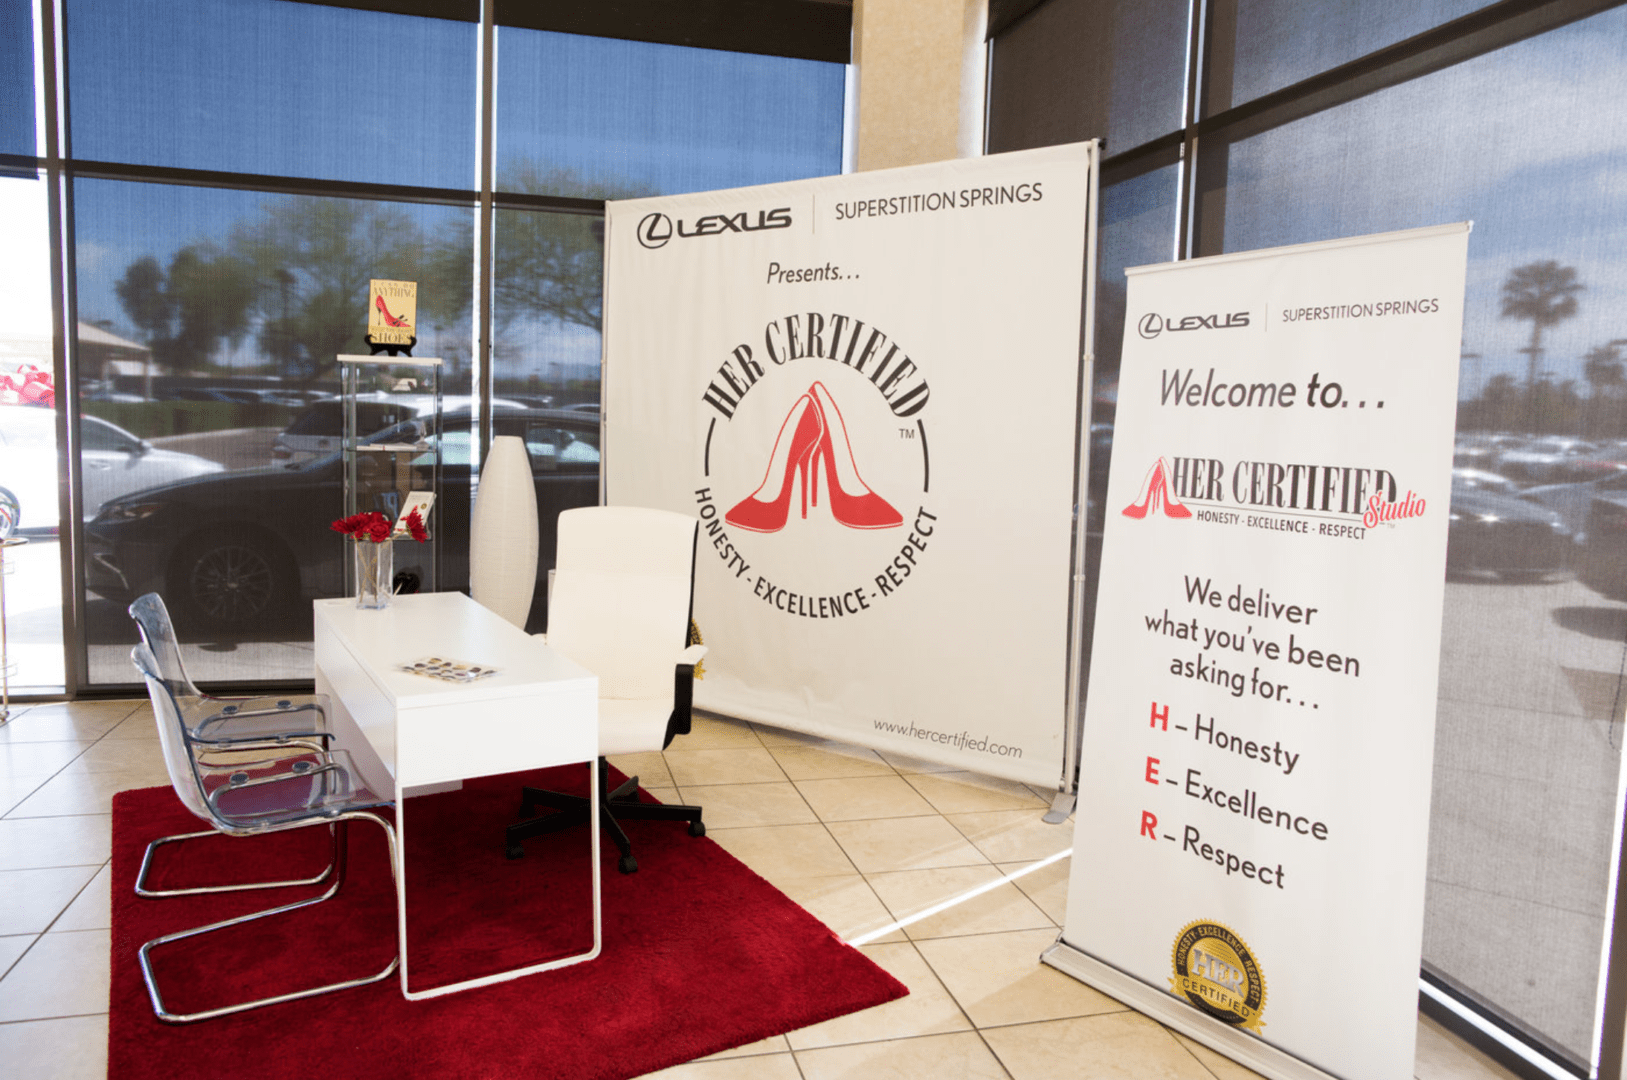 A dealership lobby with a lexus banner, two promotional stands, and a seating area with a white table and chairs on a red carpet.